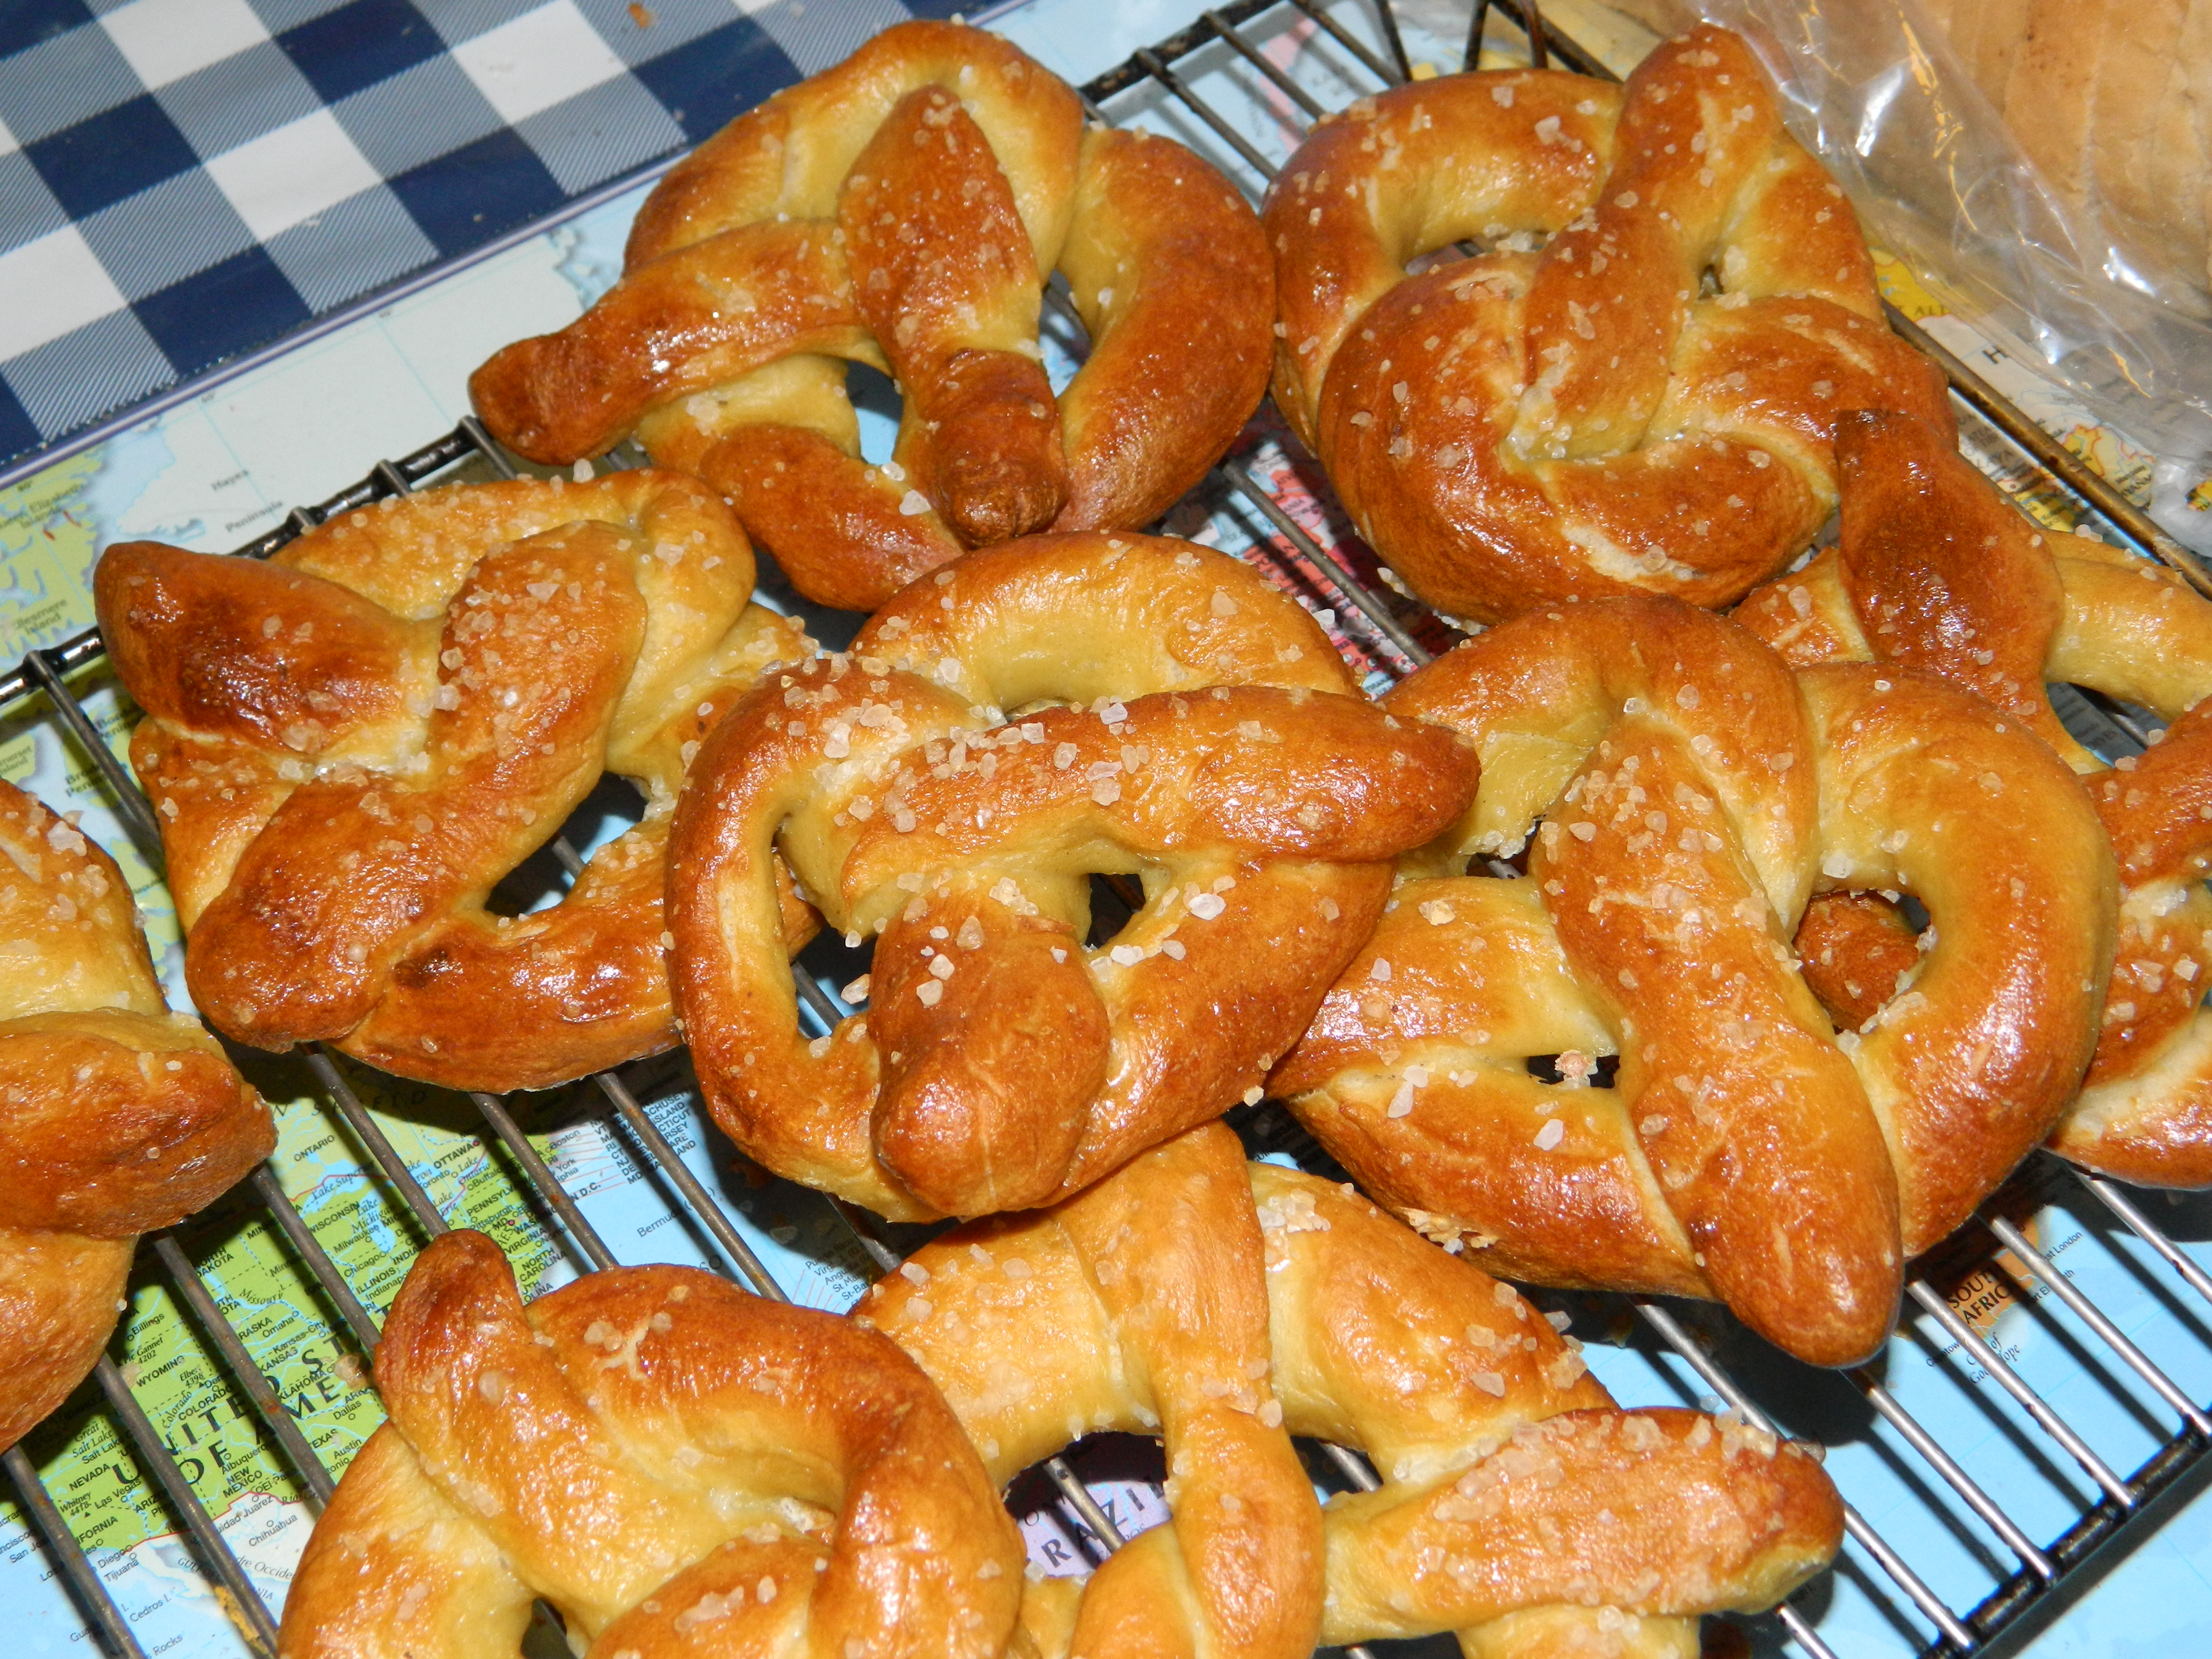 Homemade Pretzels (2 types: Traditional and Cream Cheese Filled)